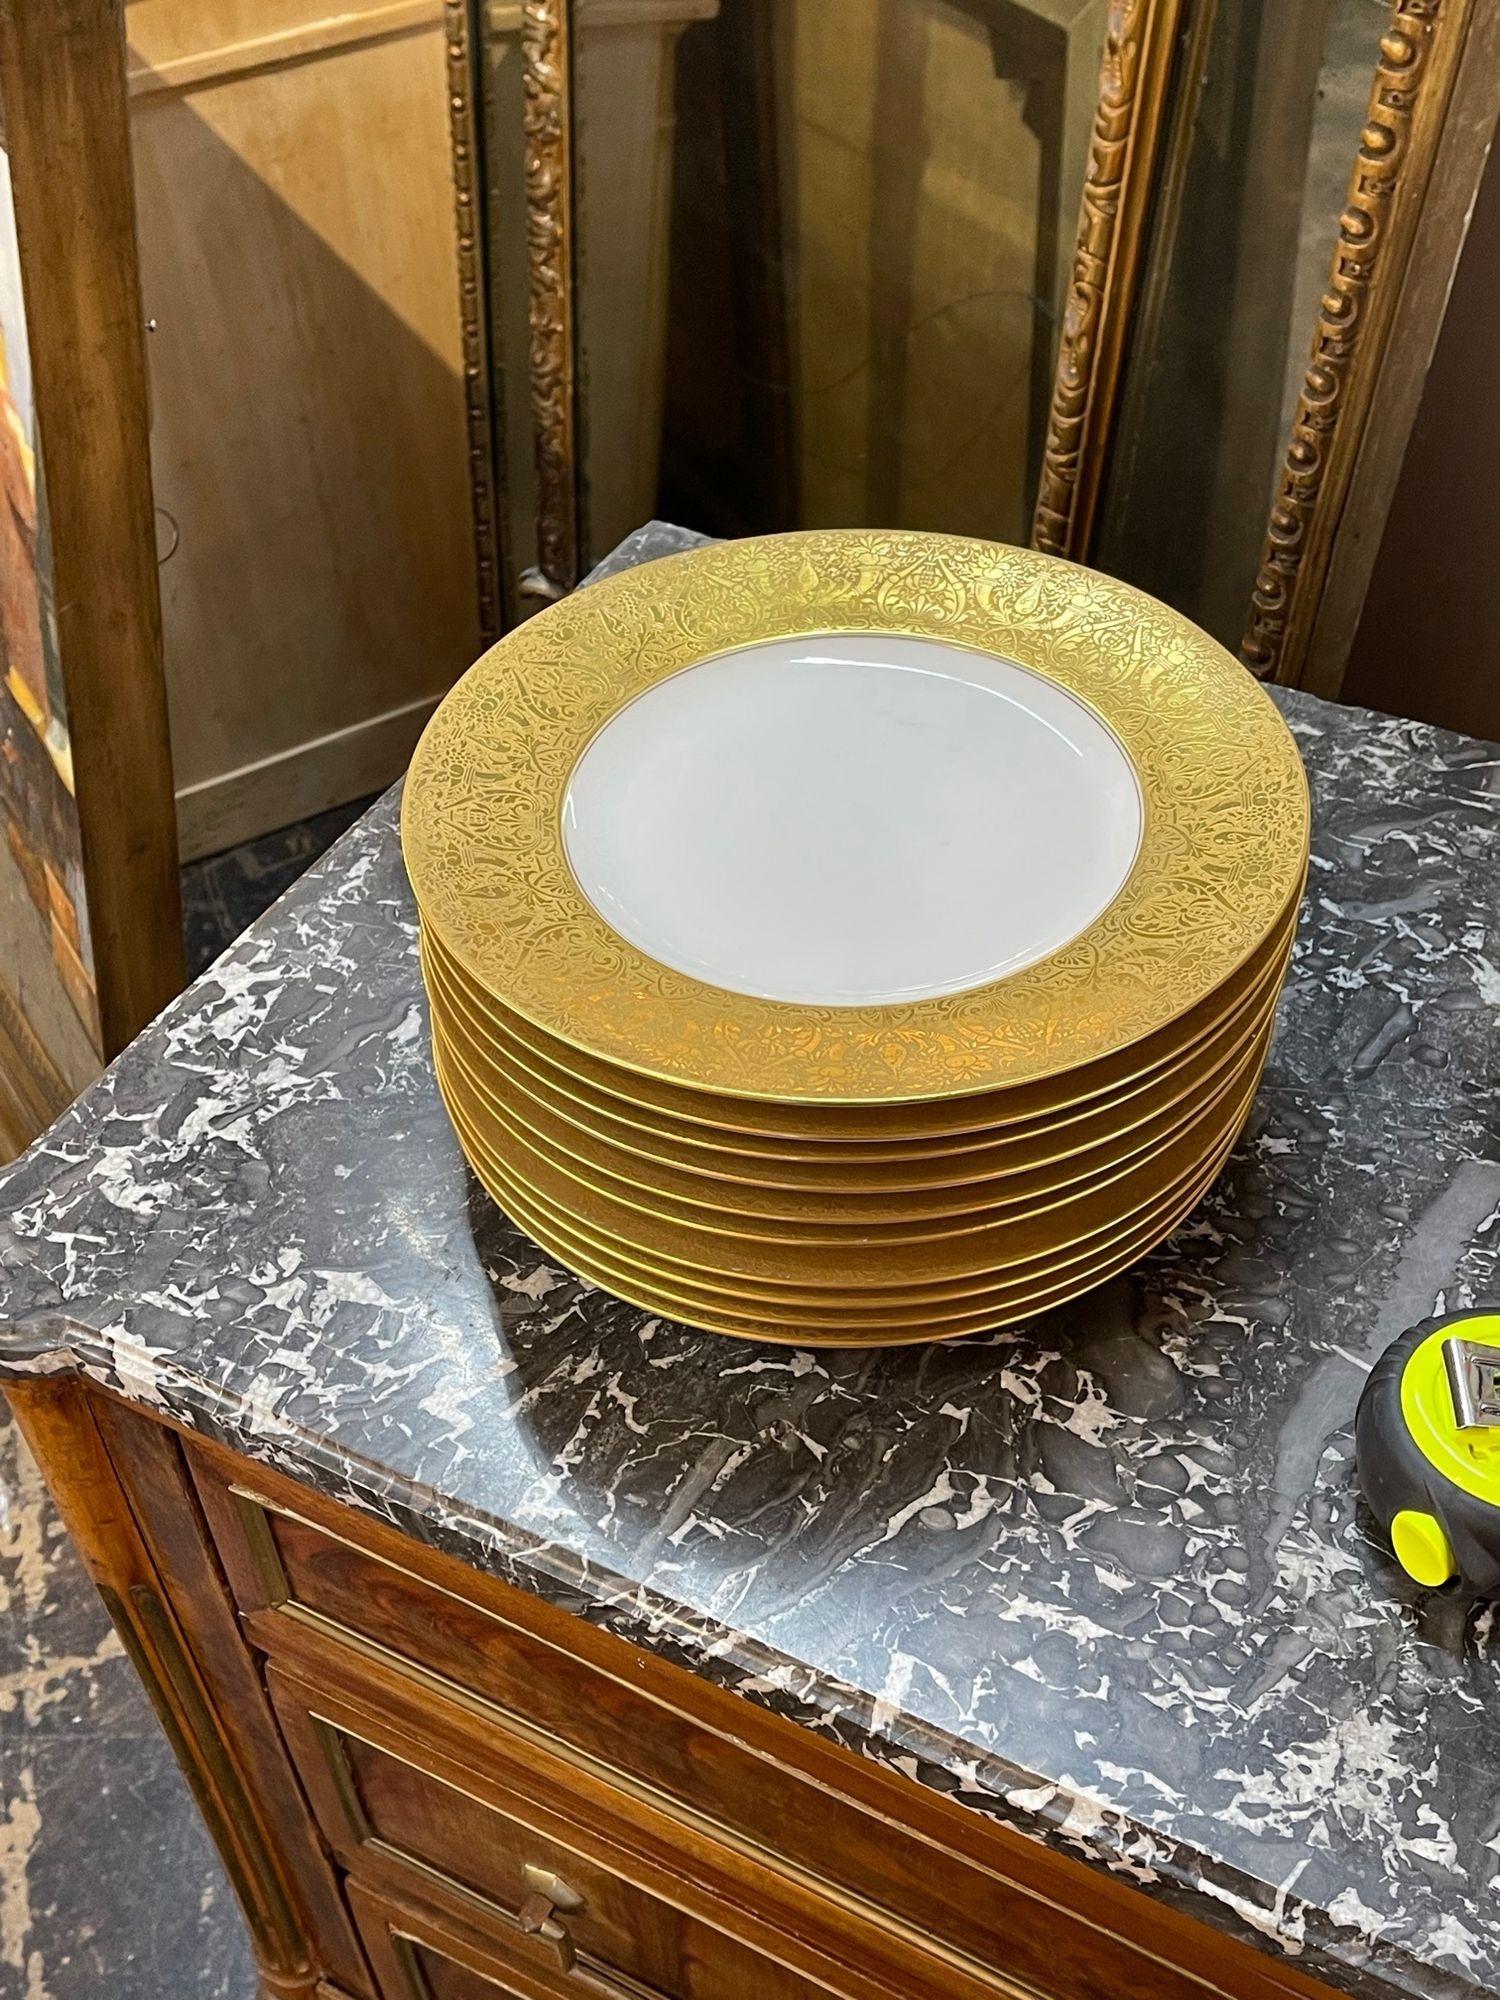 Amazing set of 10 Royal Bavarian gold encrusted service plates. A very fine set that would make for a beautiful dining experience!